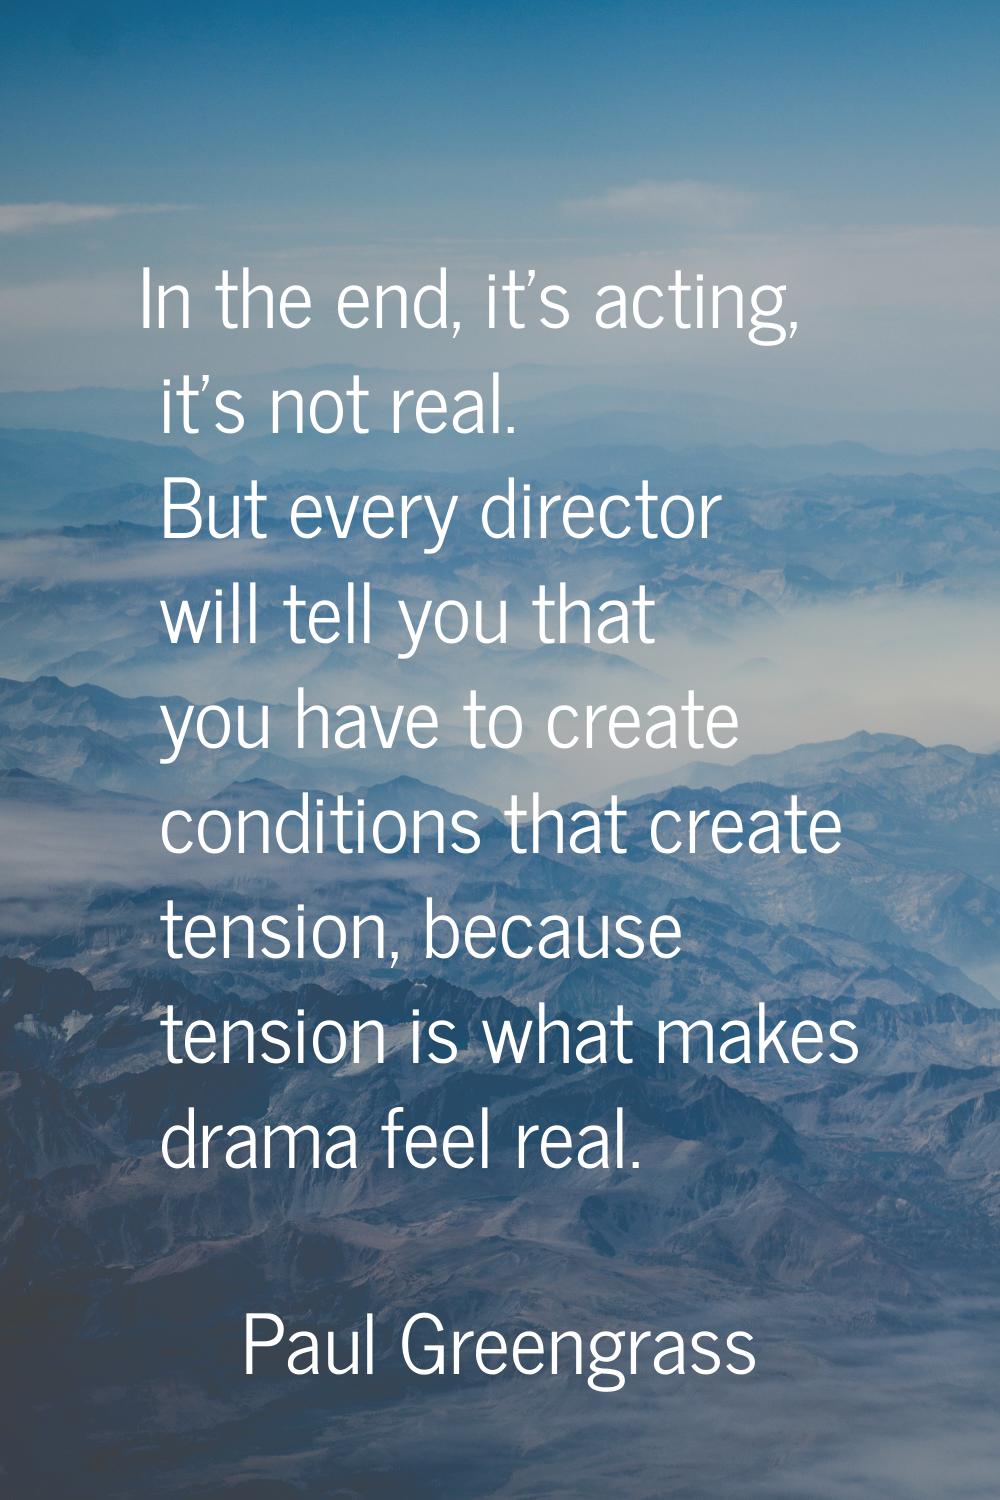 In the end, it's acting, it's not real. But every director will tell you that you have to create co